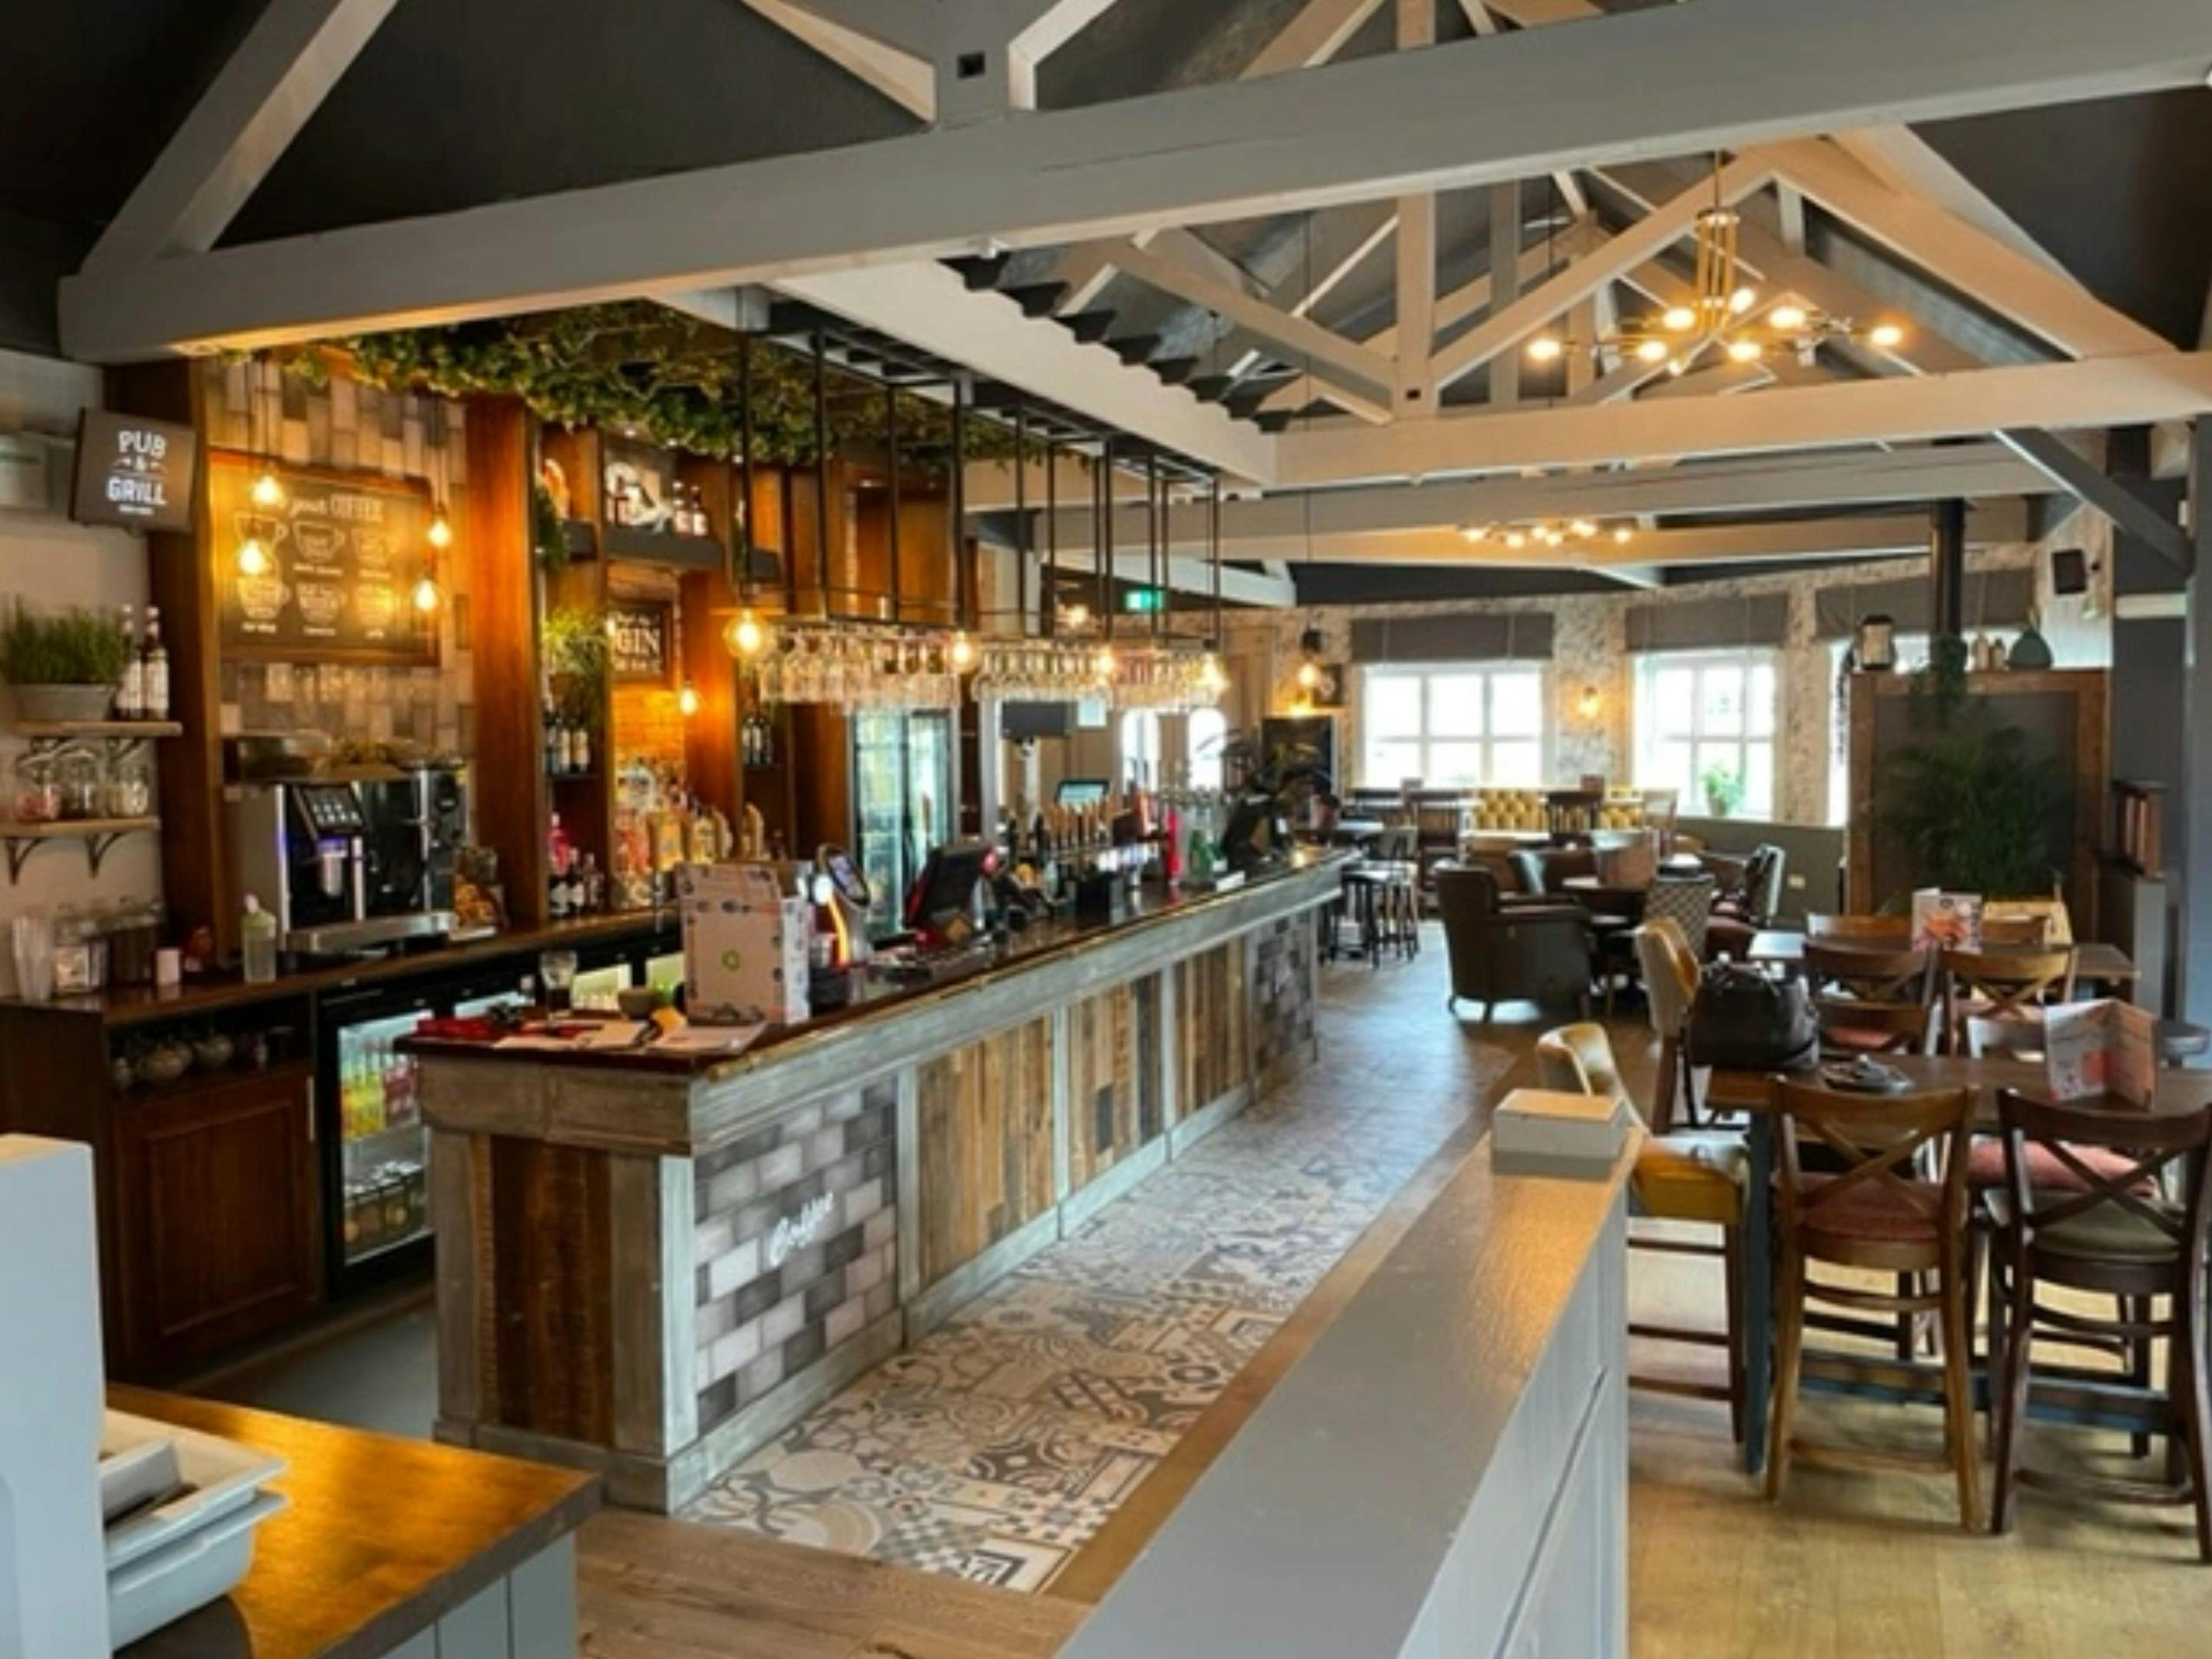 Bar and Seating Area